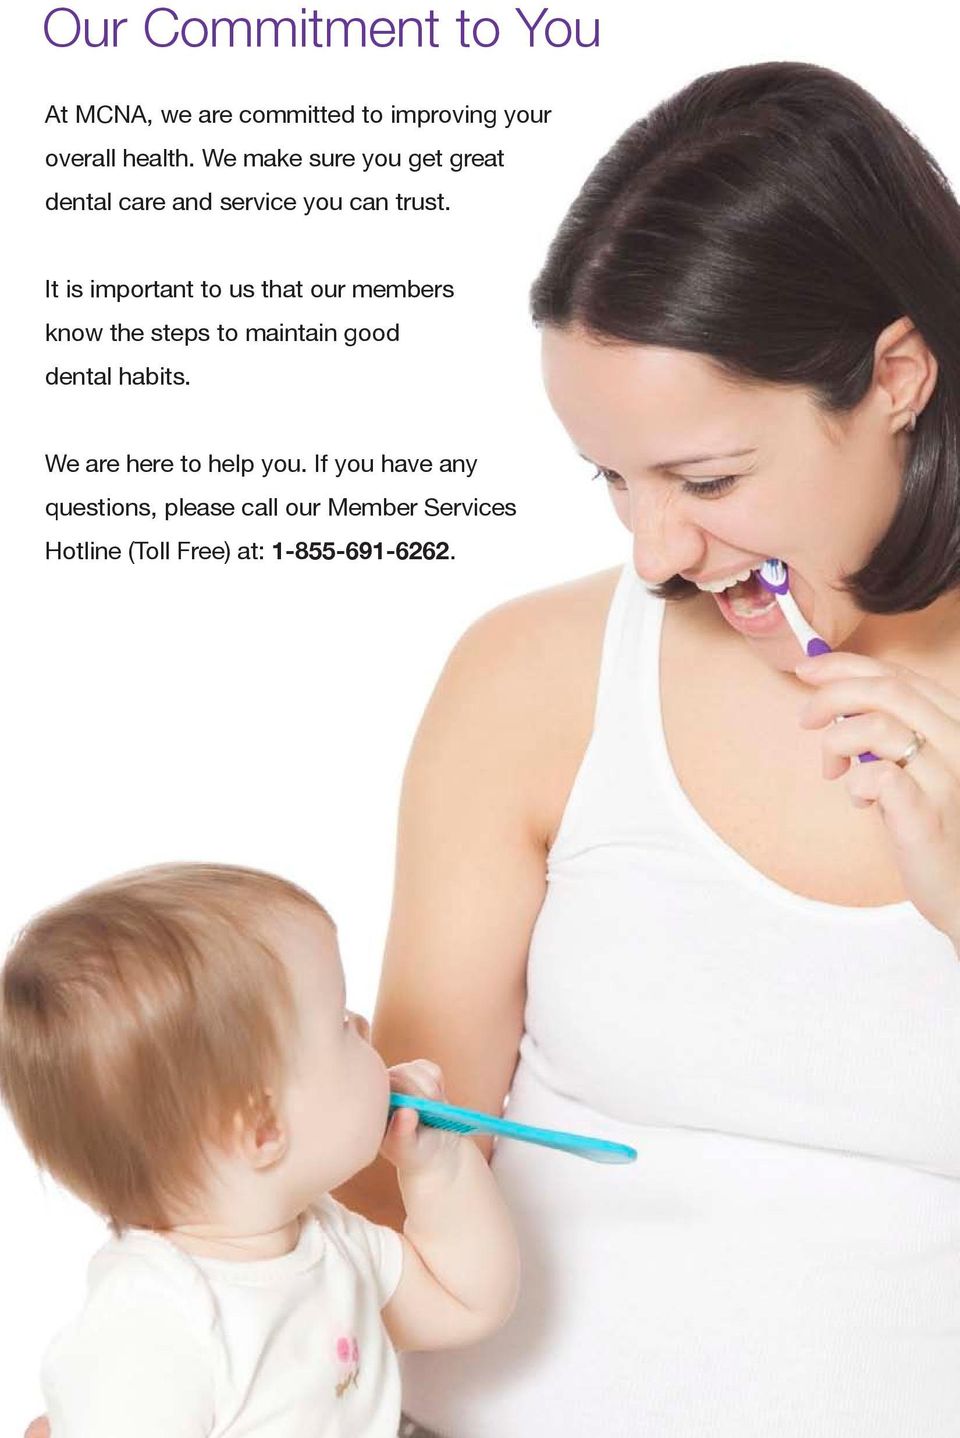 It is important to us that our members know the steps to maintain good dental habits.